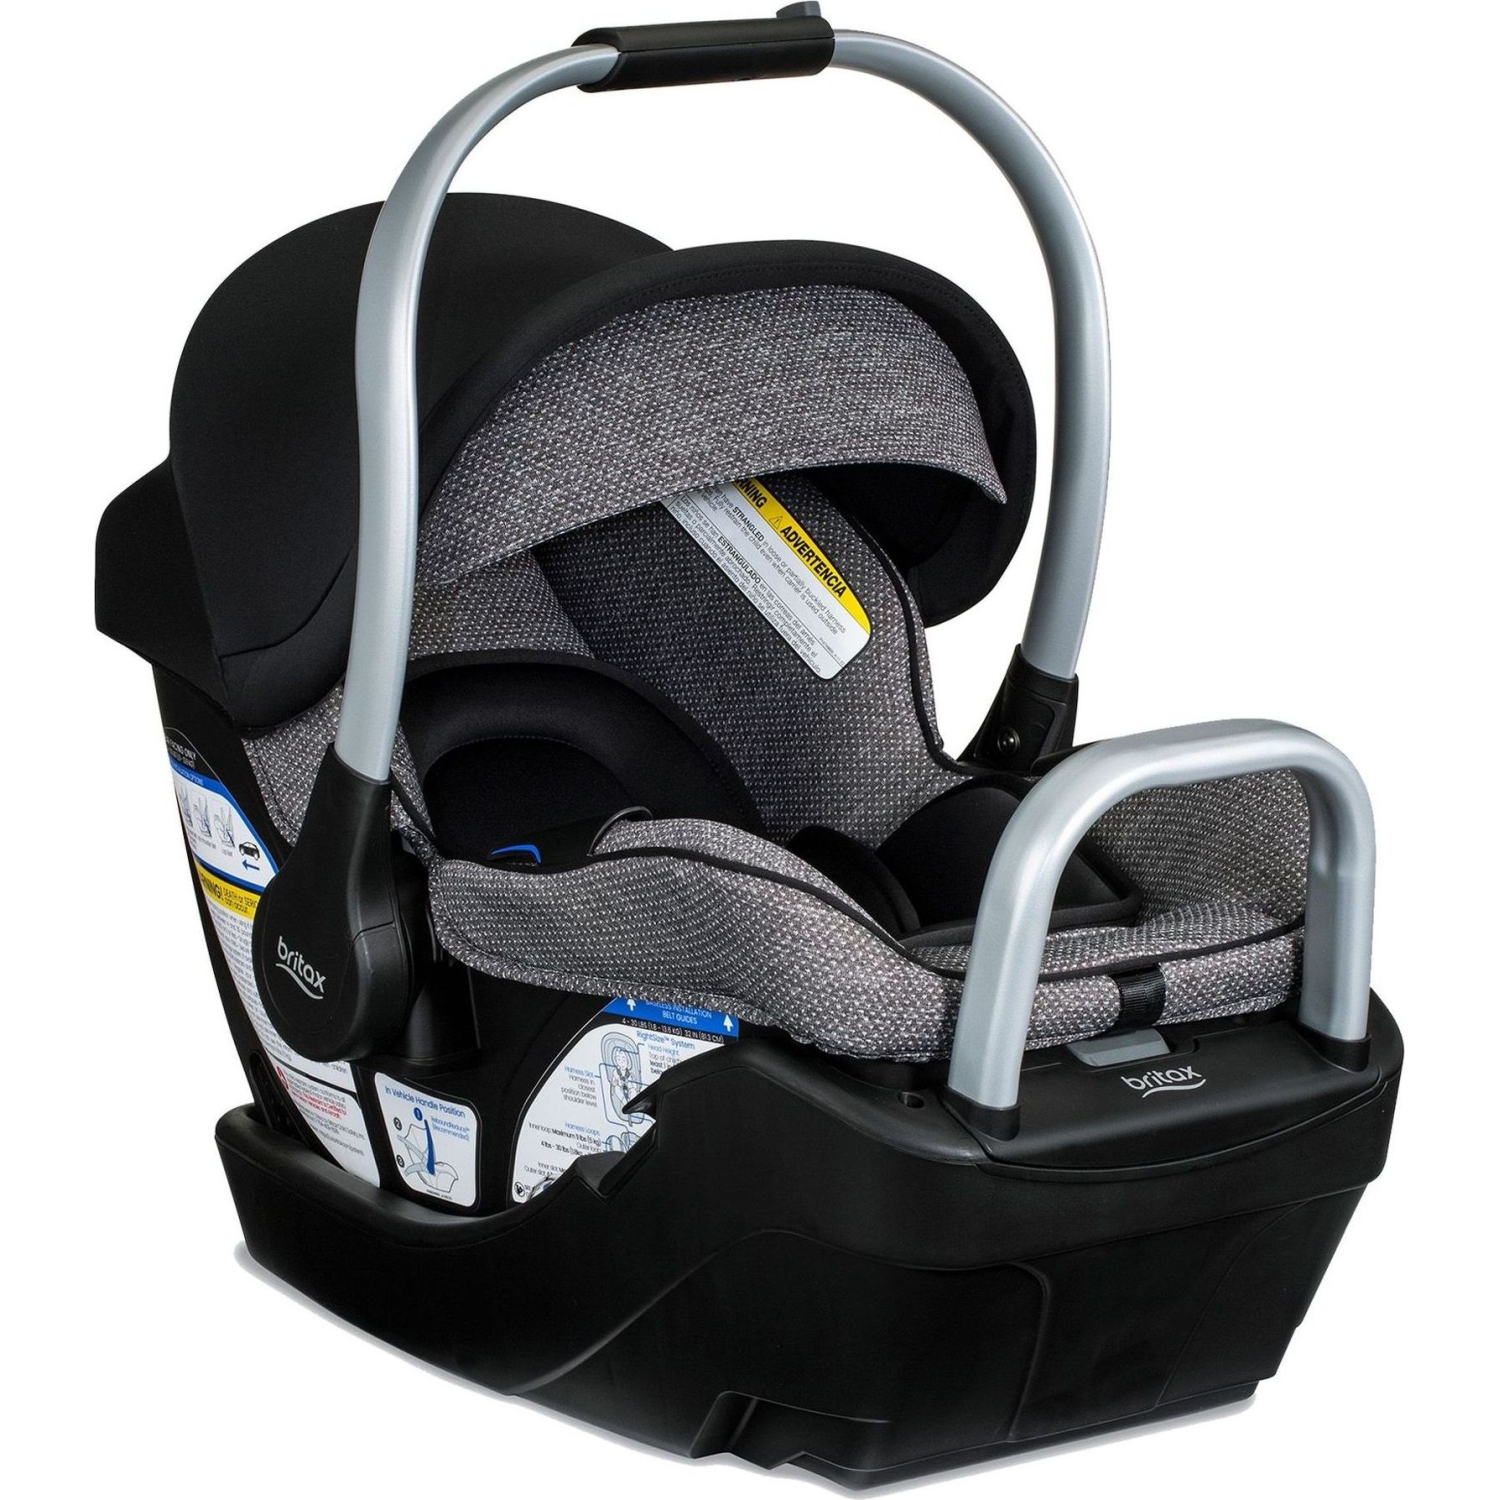 Britax Willow SC Infant Car Seat with Alpine Base - Pindot Onyx